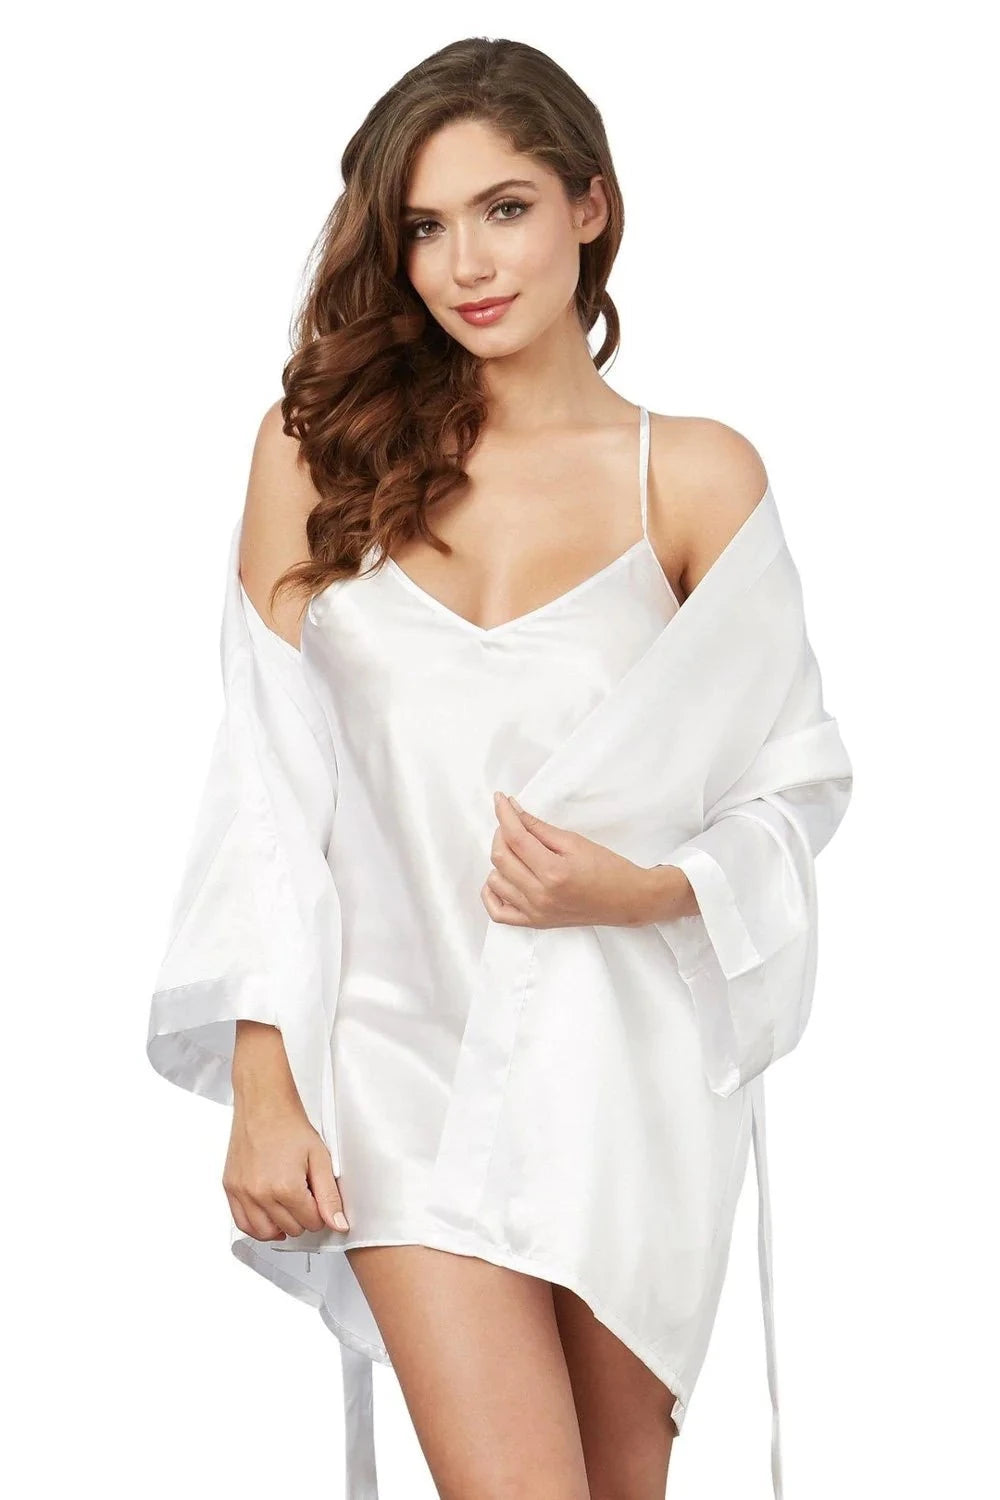 Bridal Robes Near Me - All For Me Today